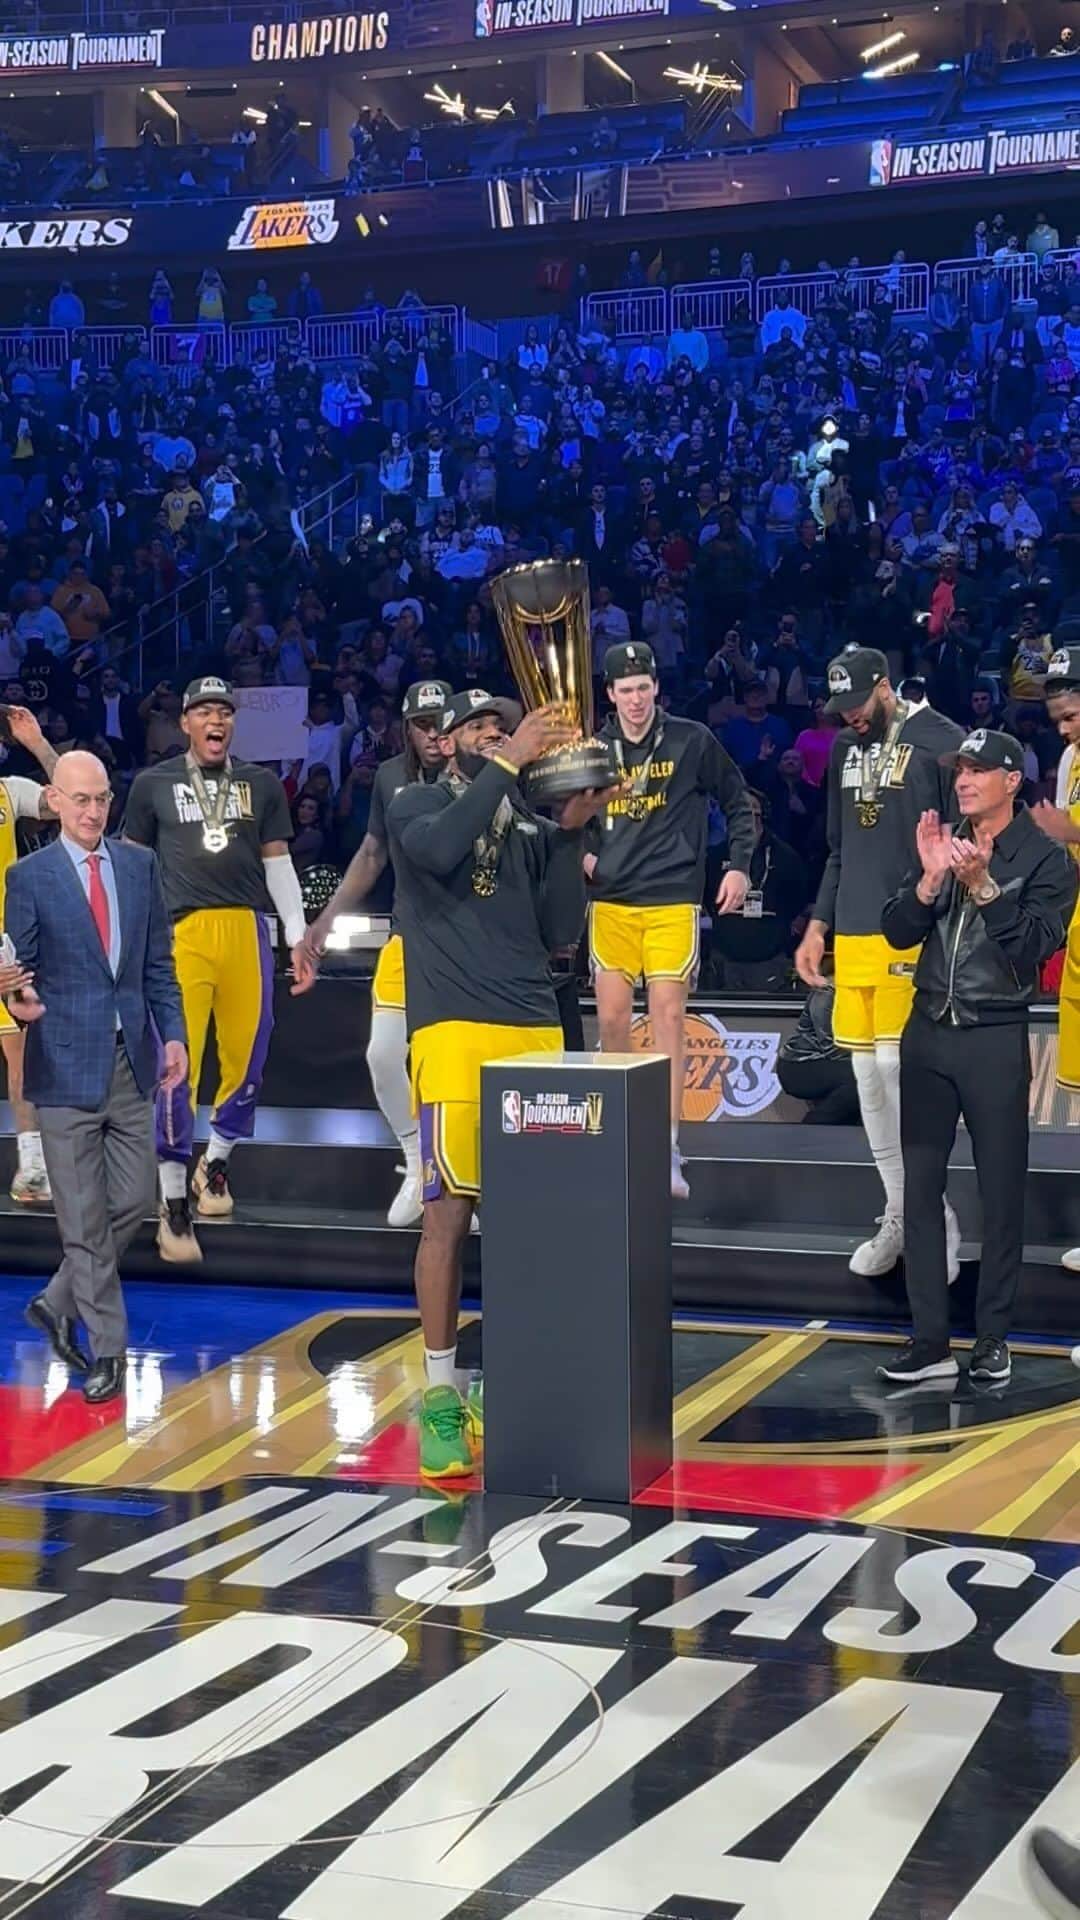 Los Angeles Lakersのインスタグラム：「YOUR IN-SEASON TOURNAMENT CHAMPIONS」